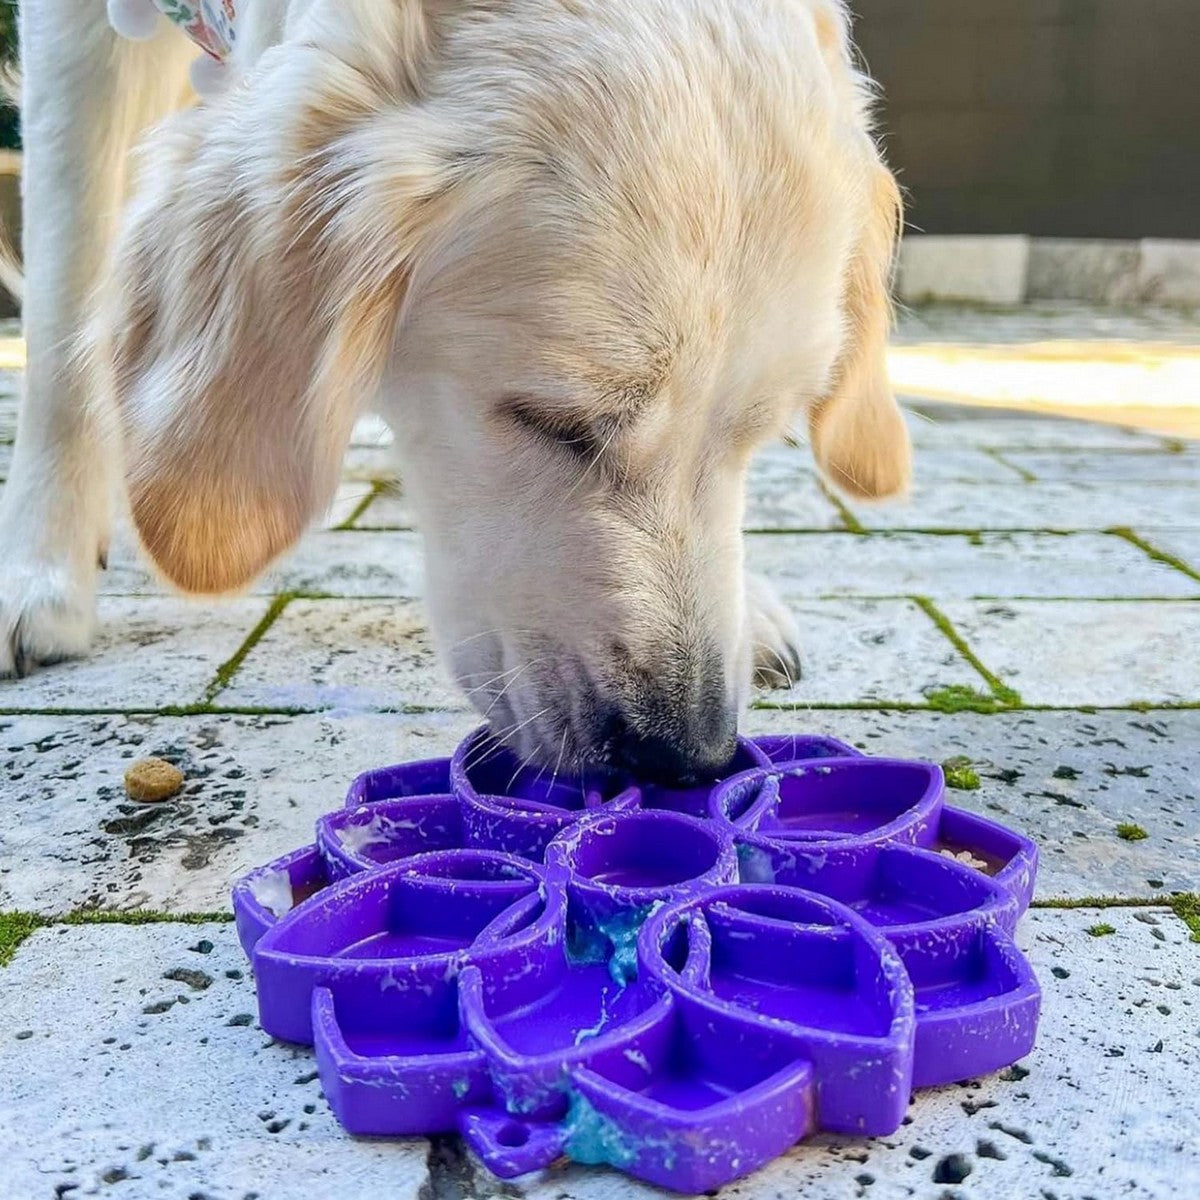 Water Frog Design eTray Enrichment Tray for Dogs Purple